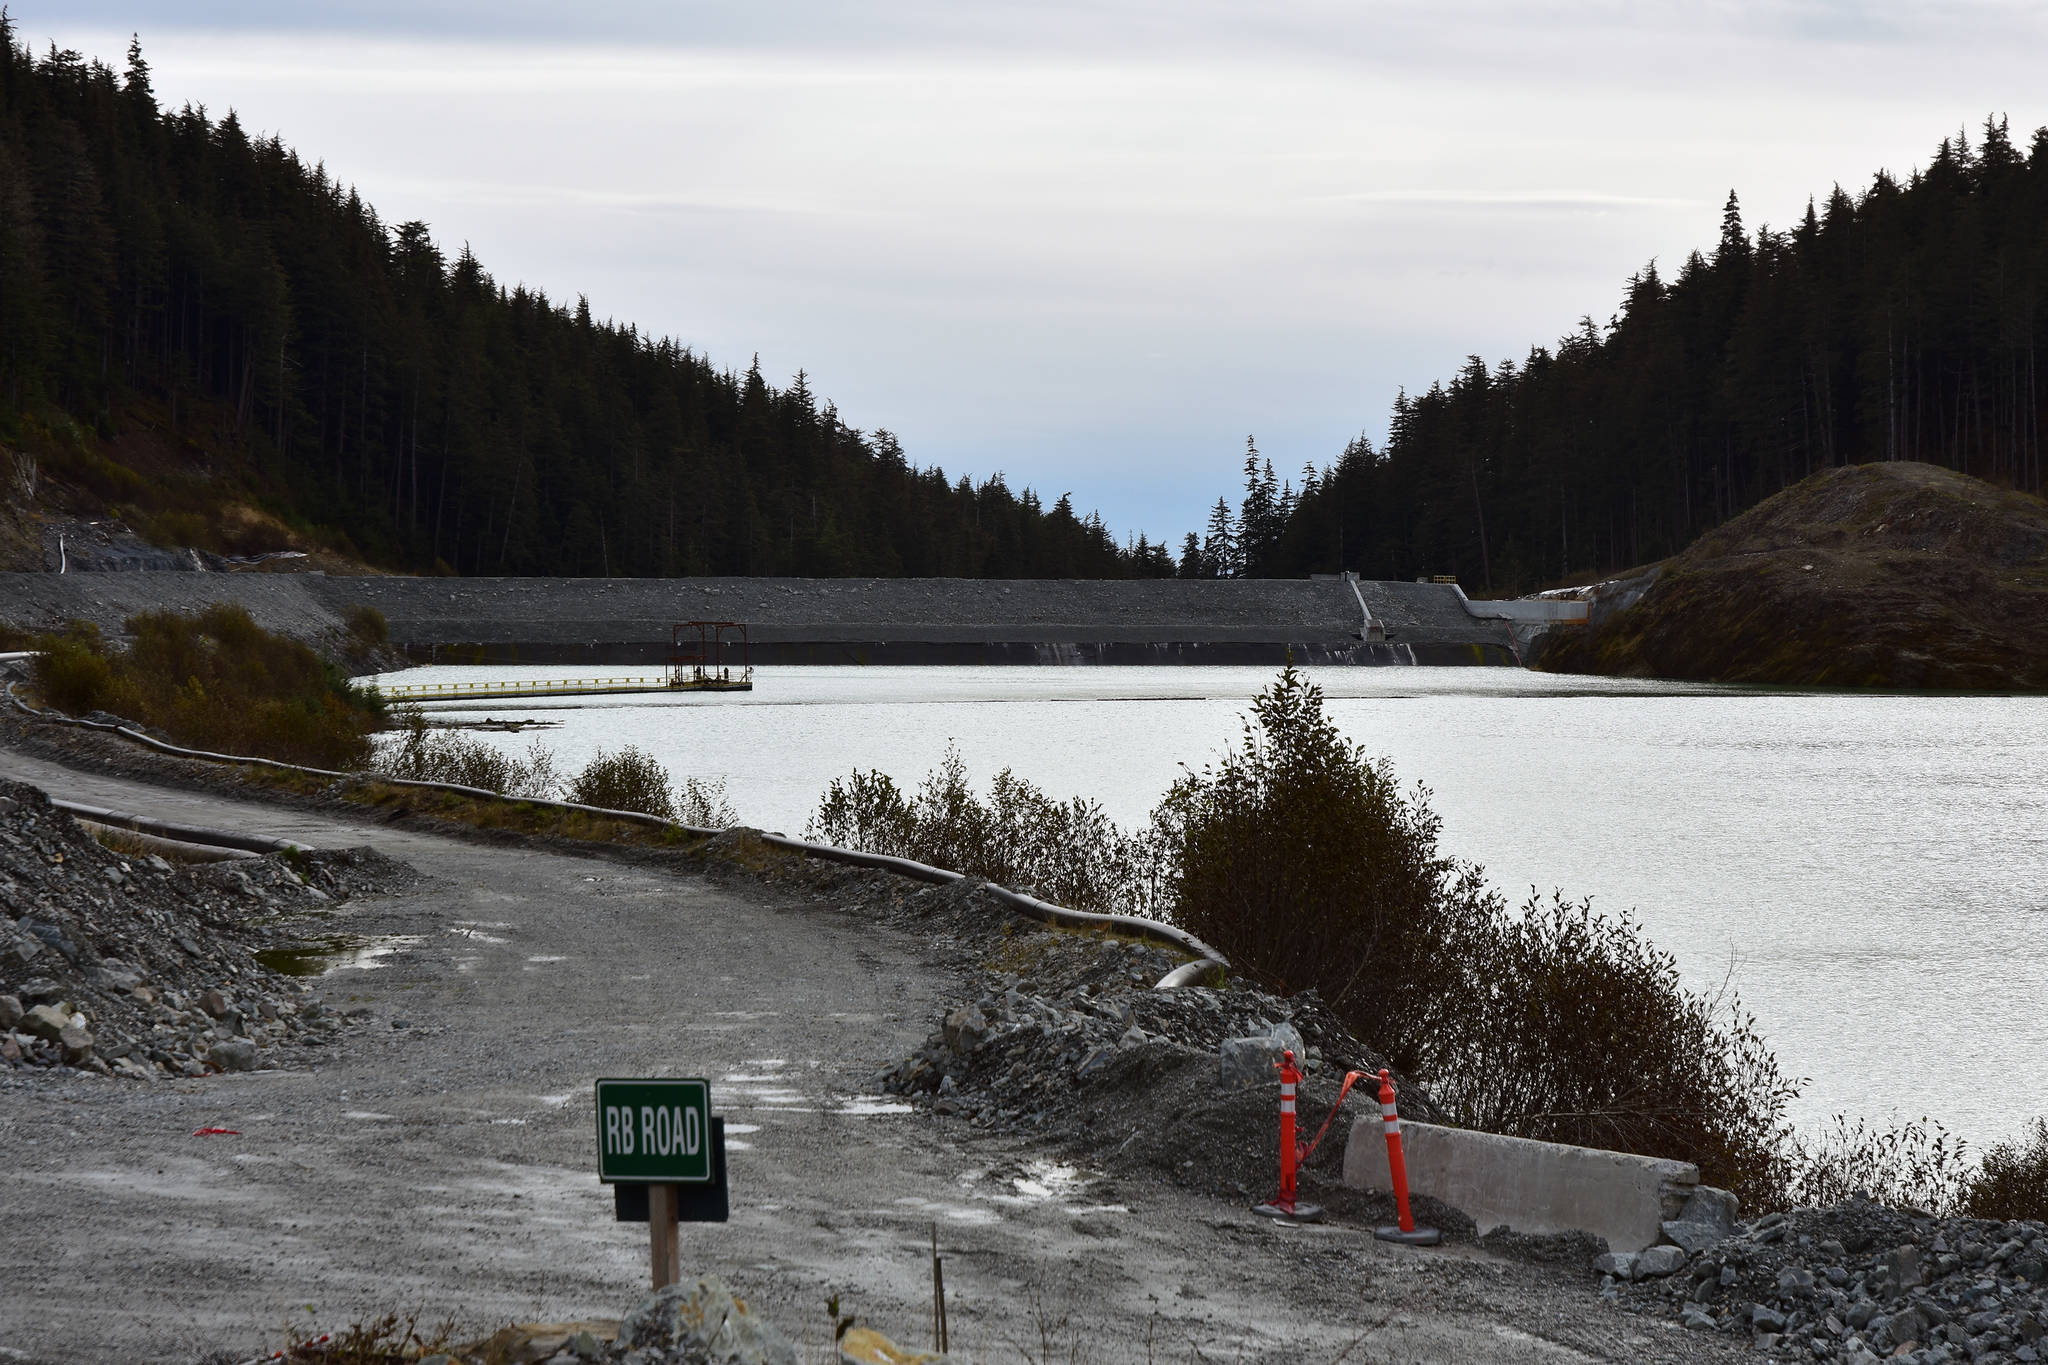 The Tailings Treatment Facility at Kensington Gold Mine on Monday, Oct. 14, 2019. (Peter Segall | Juneau Empire)